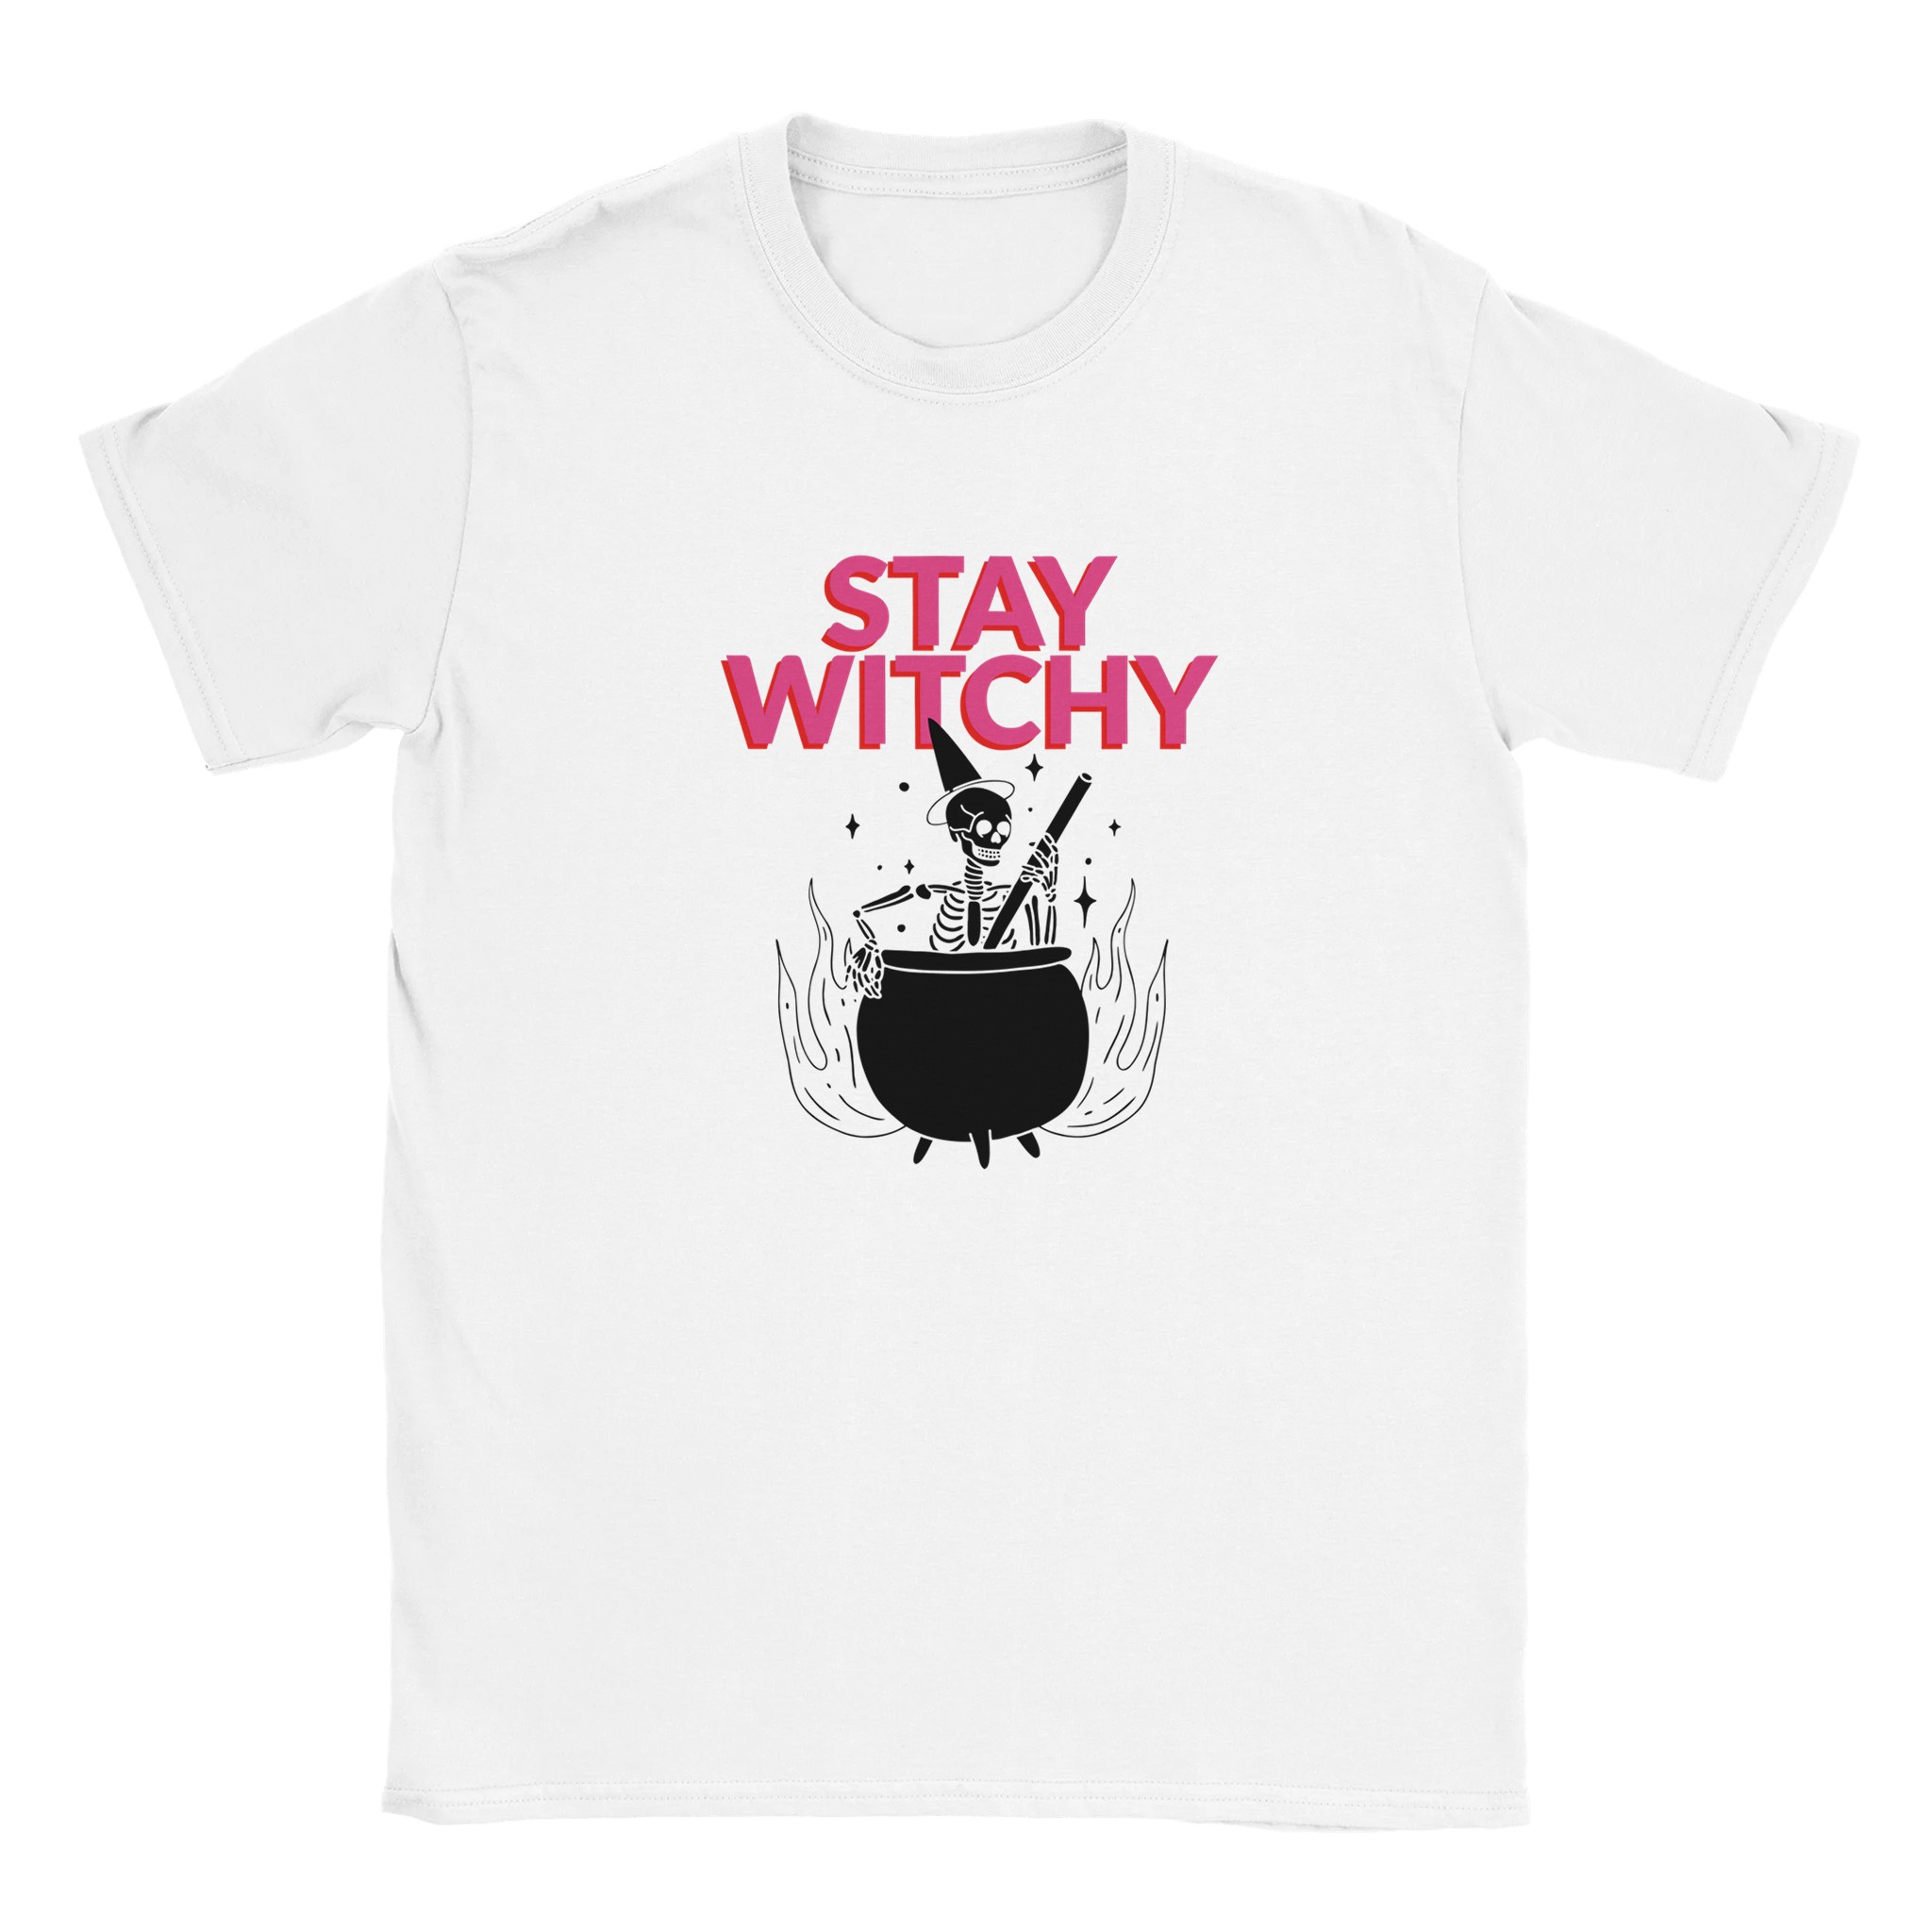 Stay witchy Tshirt design